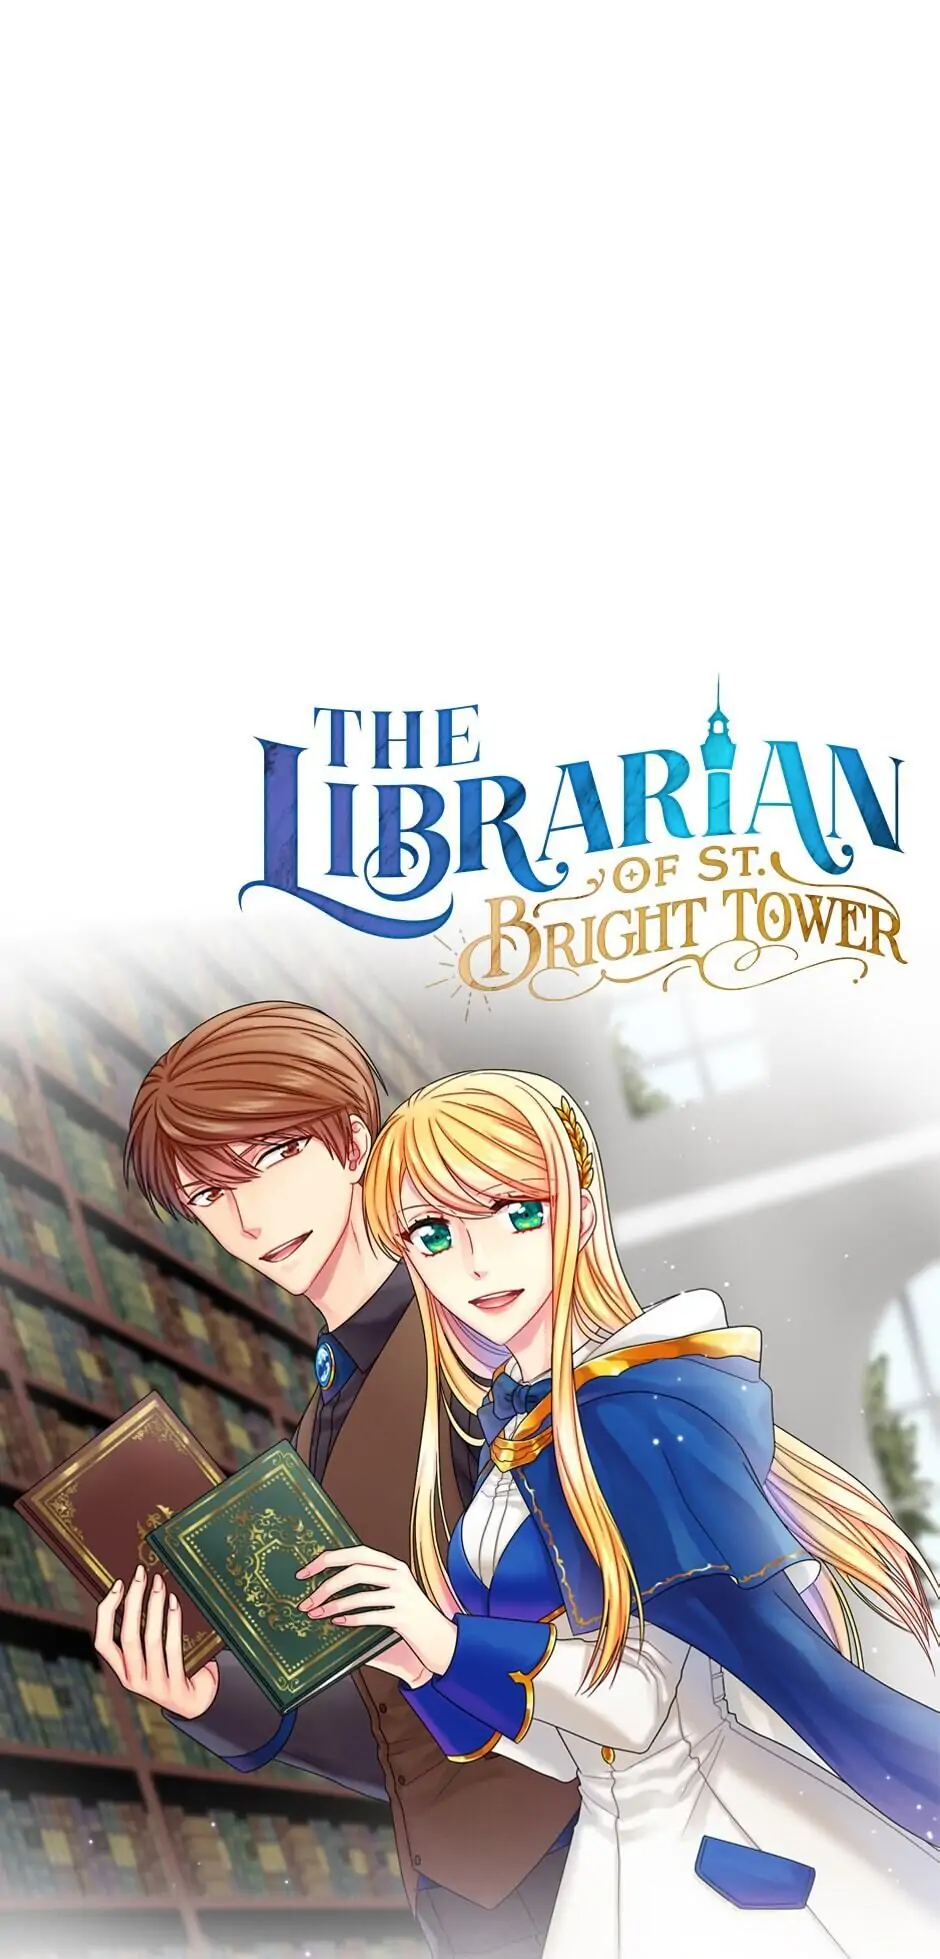 The Magic Tower Librarian chapter 1